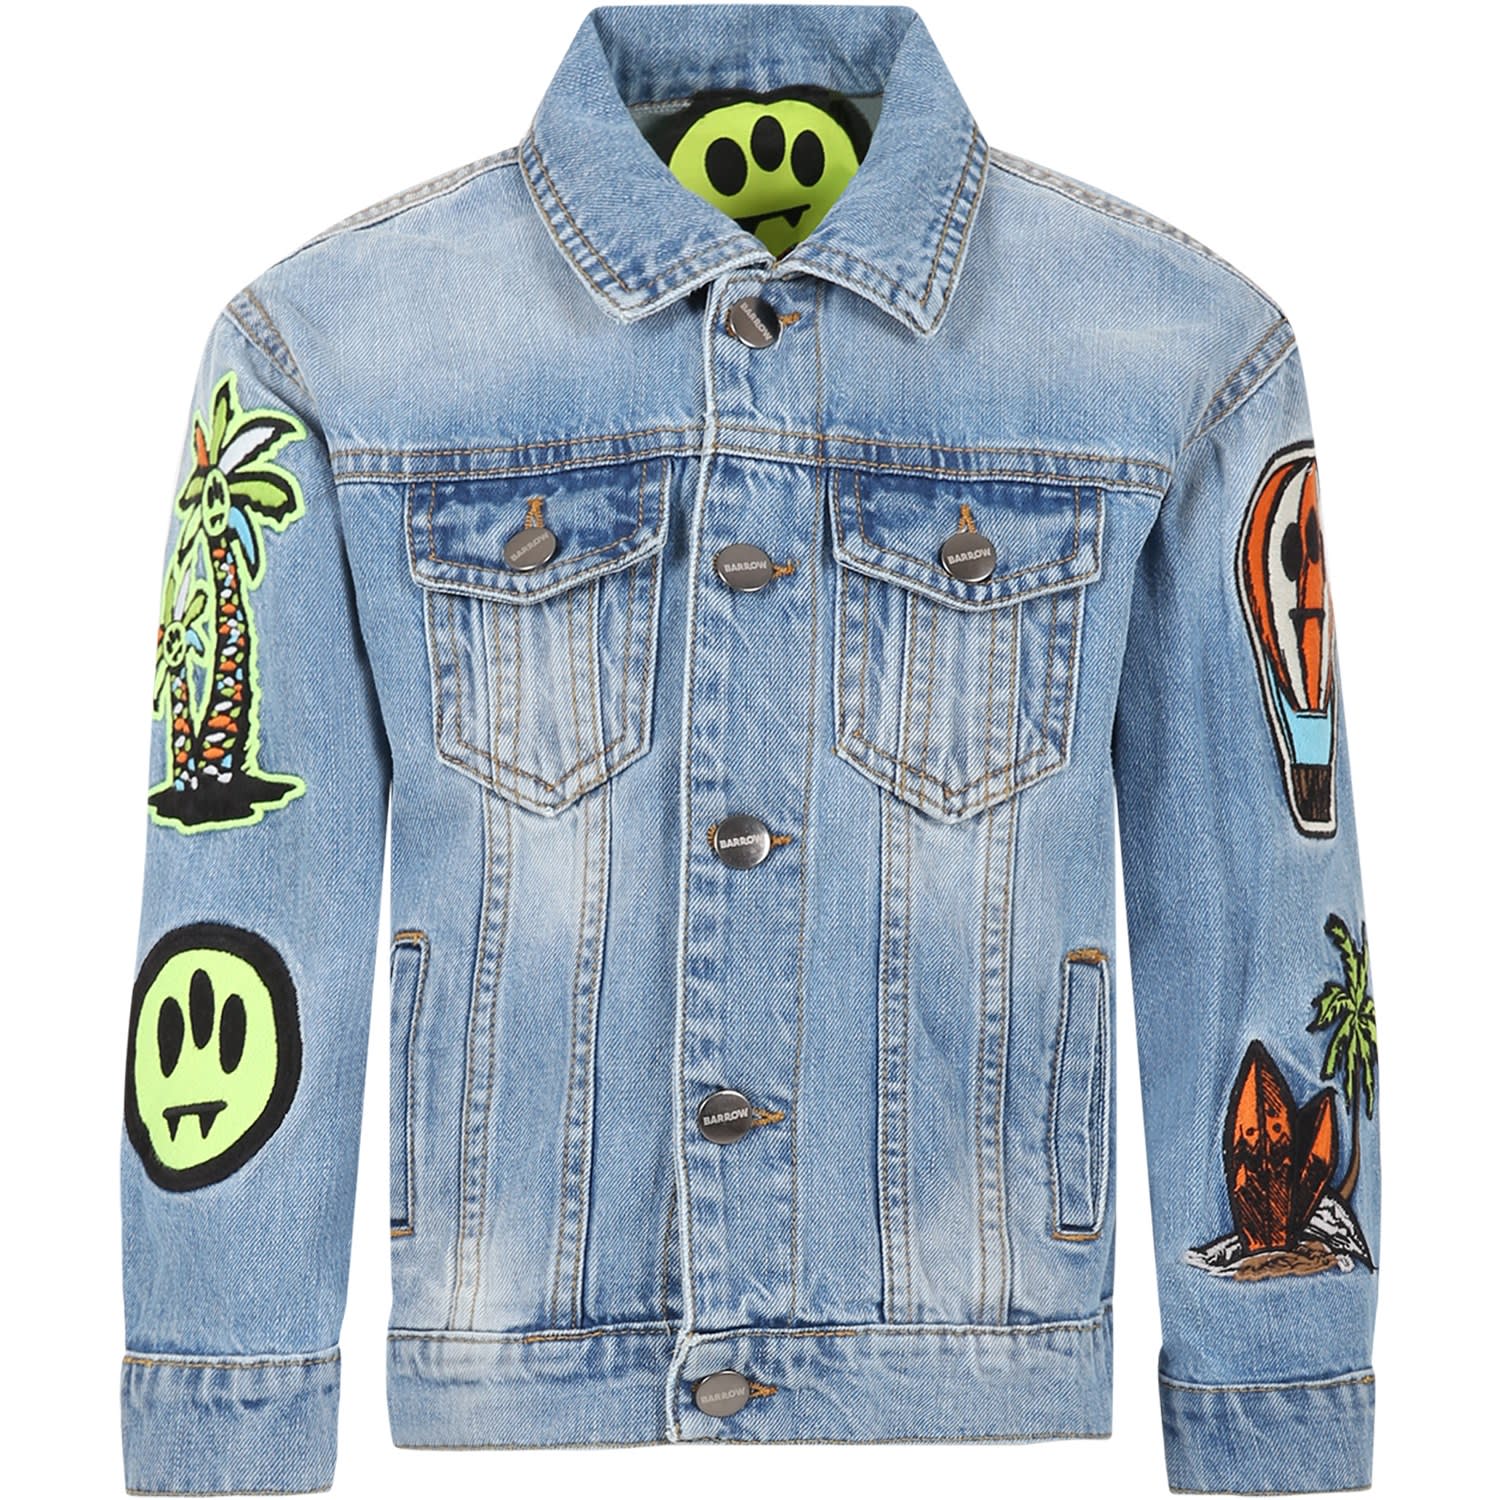 Shop Barrow Light Blue Jacket For Kids With Iconic Smiley And Patch In 200